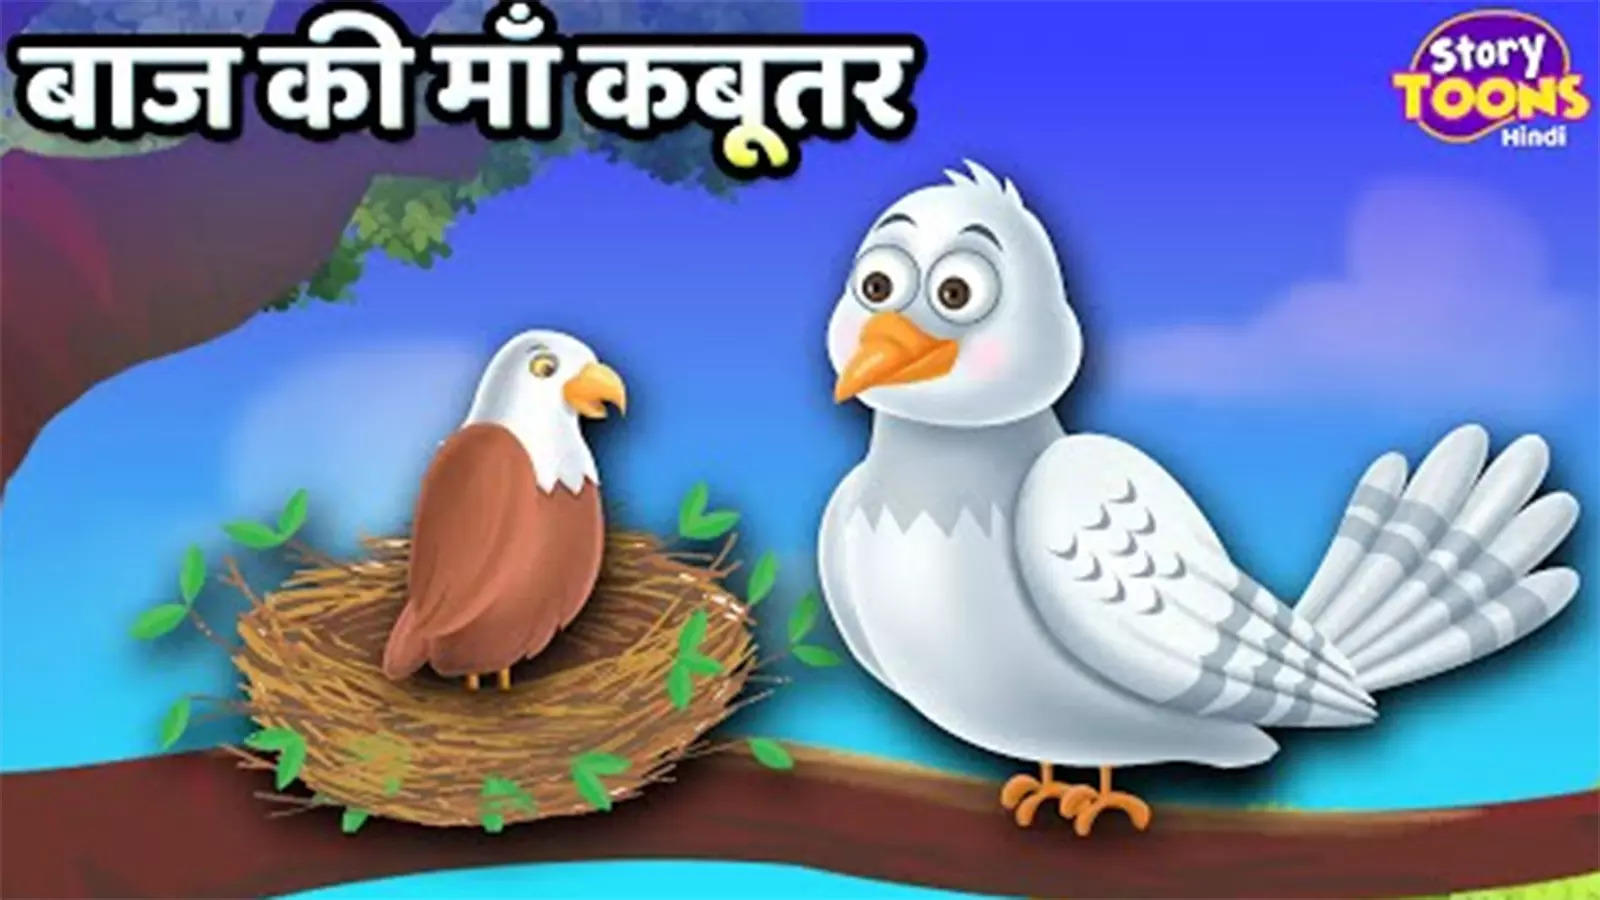 Watch Latest Children Hindi Story 'Baaz Ki Maa Kabutar' For Kids - Check  Out Kids's Nursery Rhymes And Baby Songs In Hindi | Entertainment - Times  of India Videos